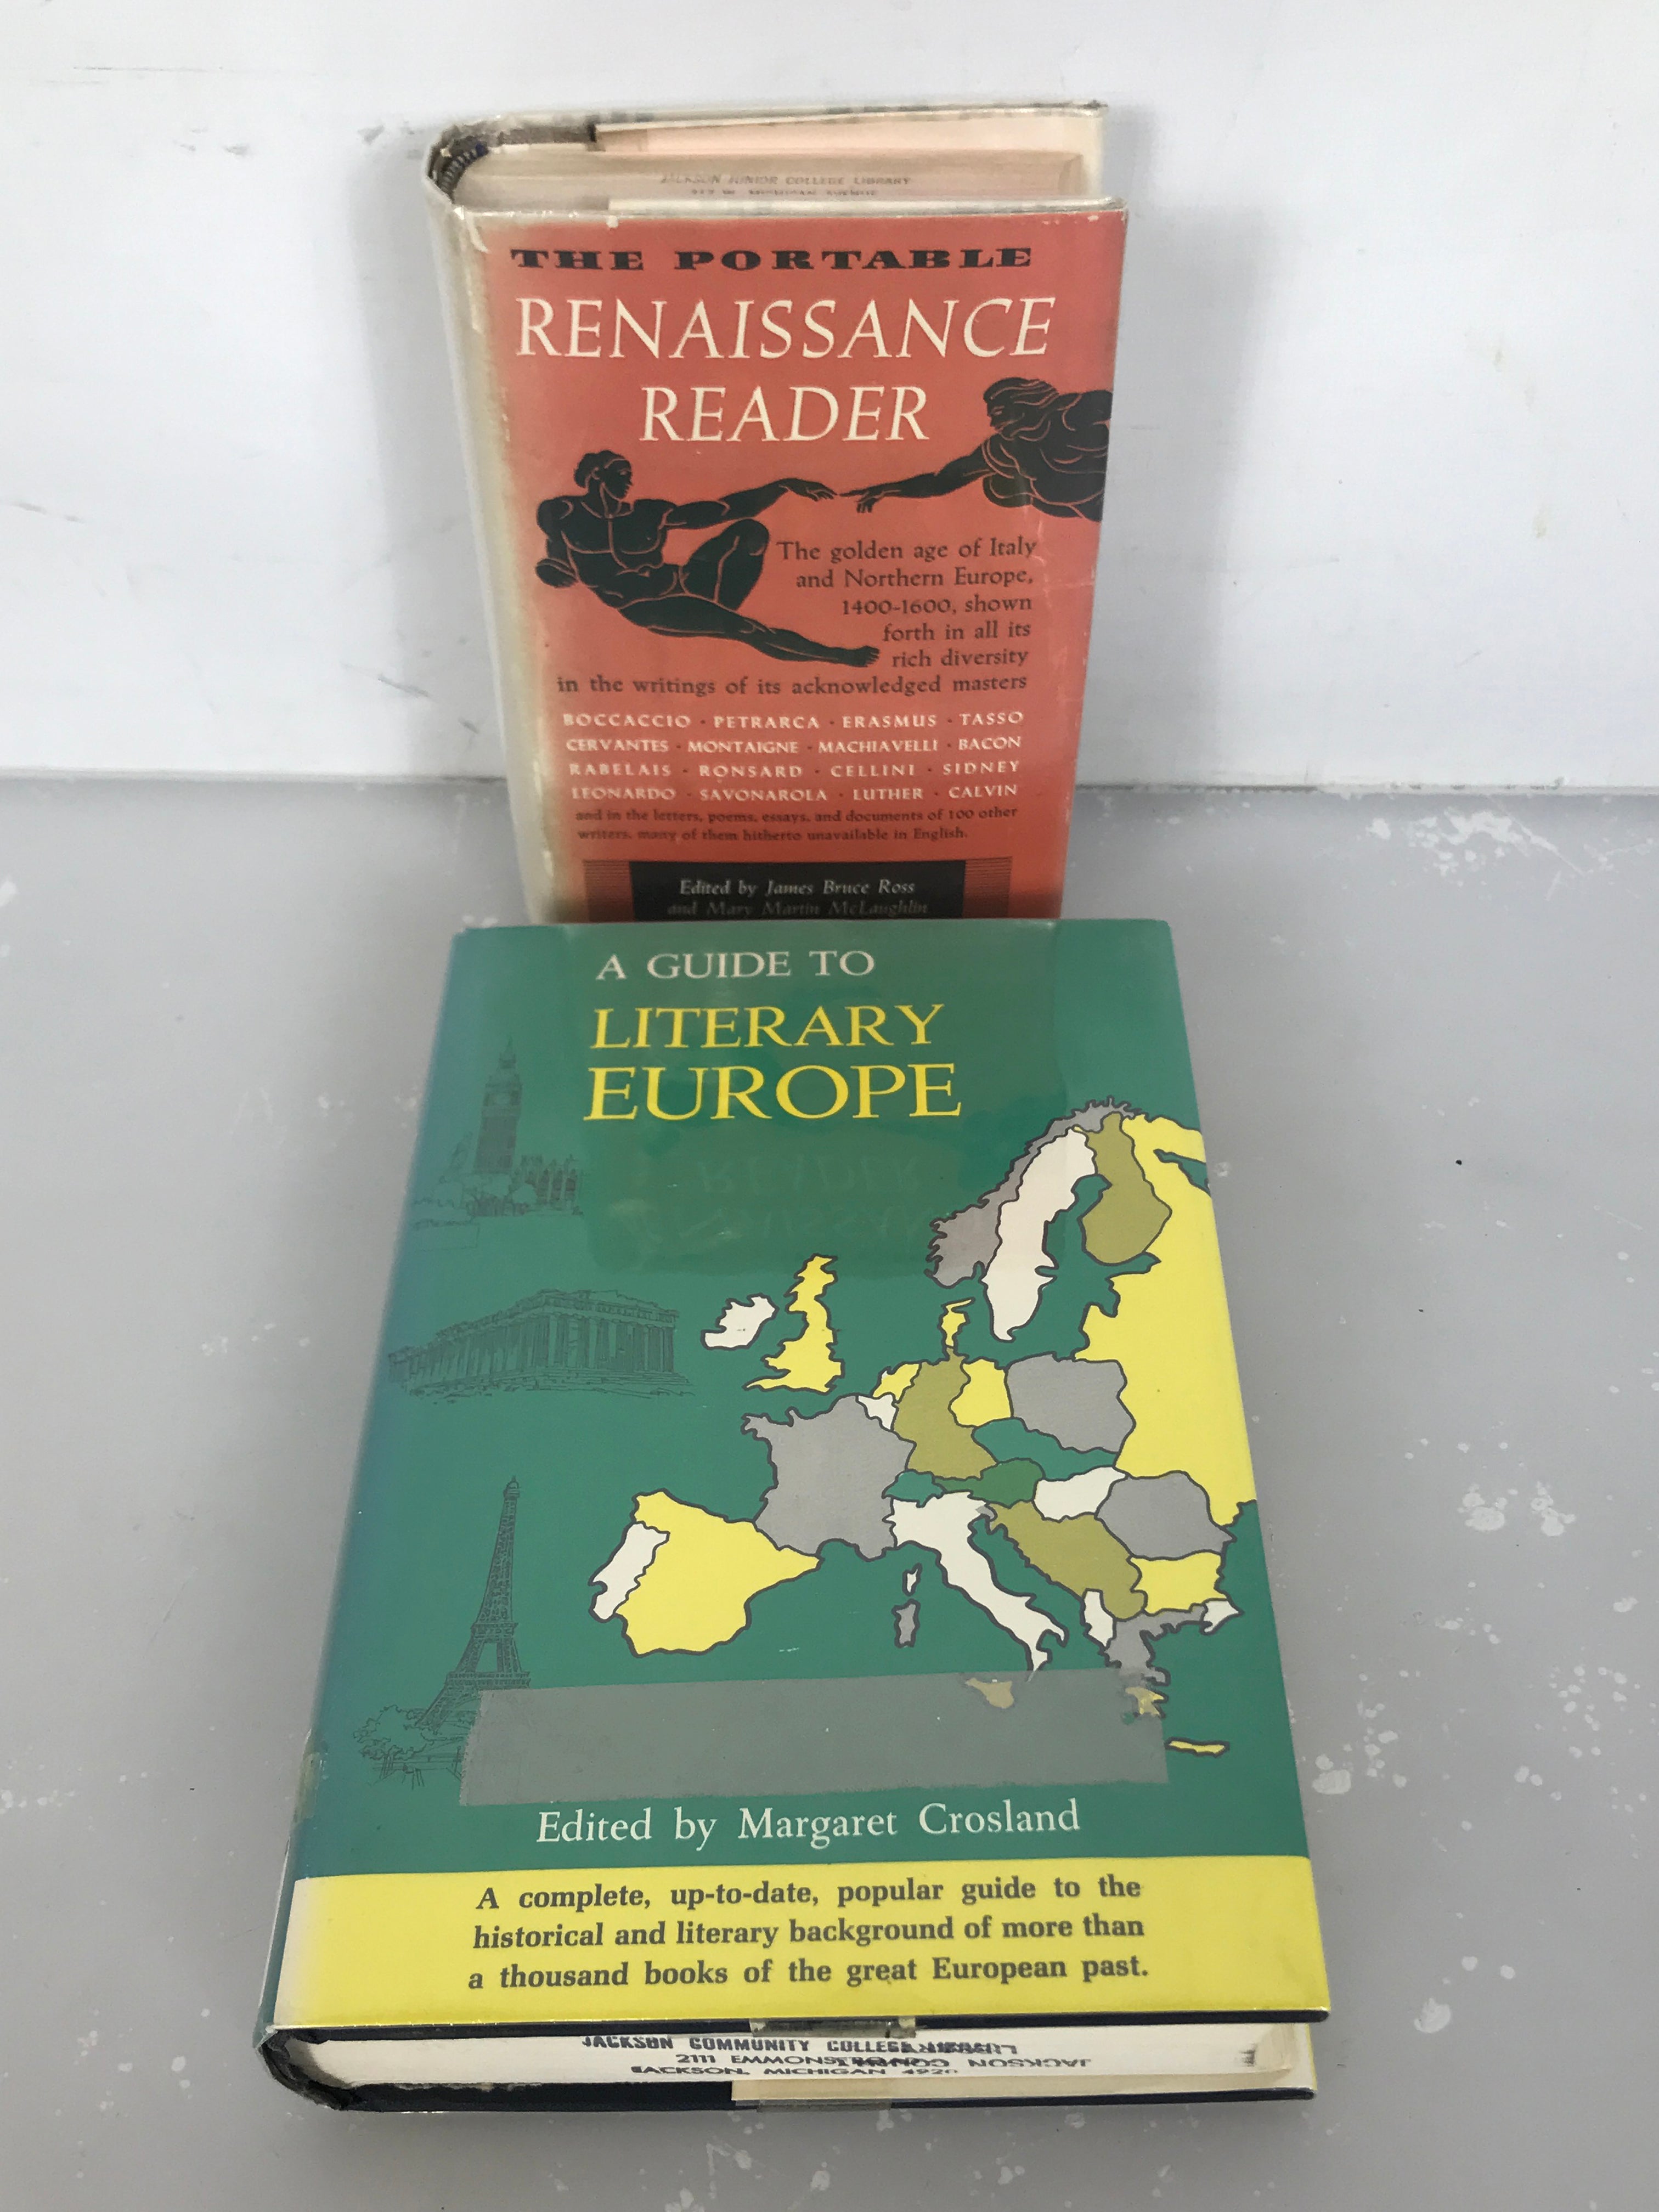 Lot of 2 European Literature Books: The Portable Renaissance Reader (1961) and A Guide to Literary Europe HC DJ